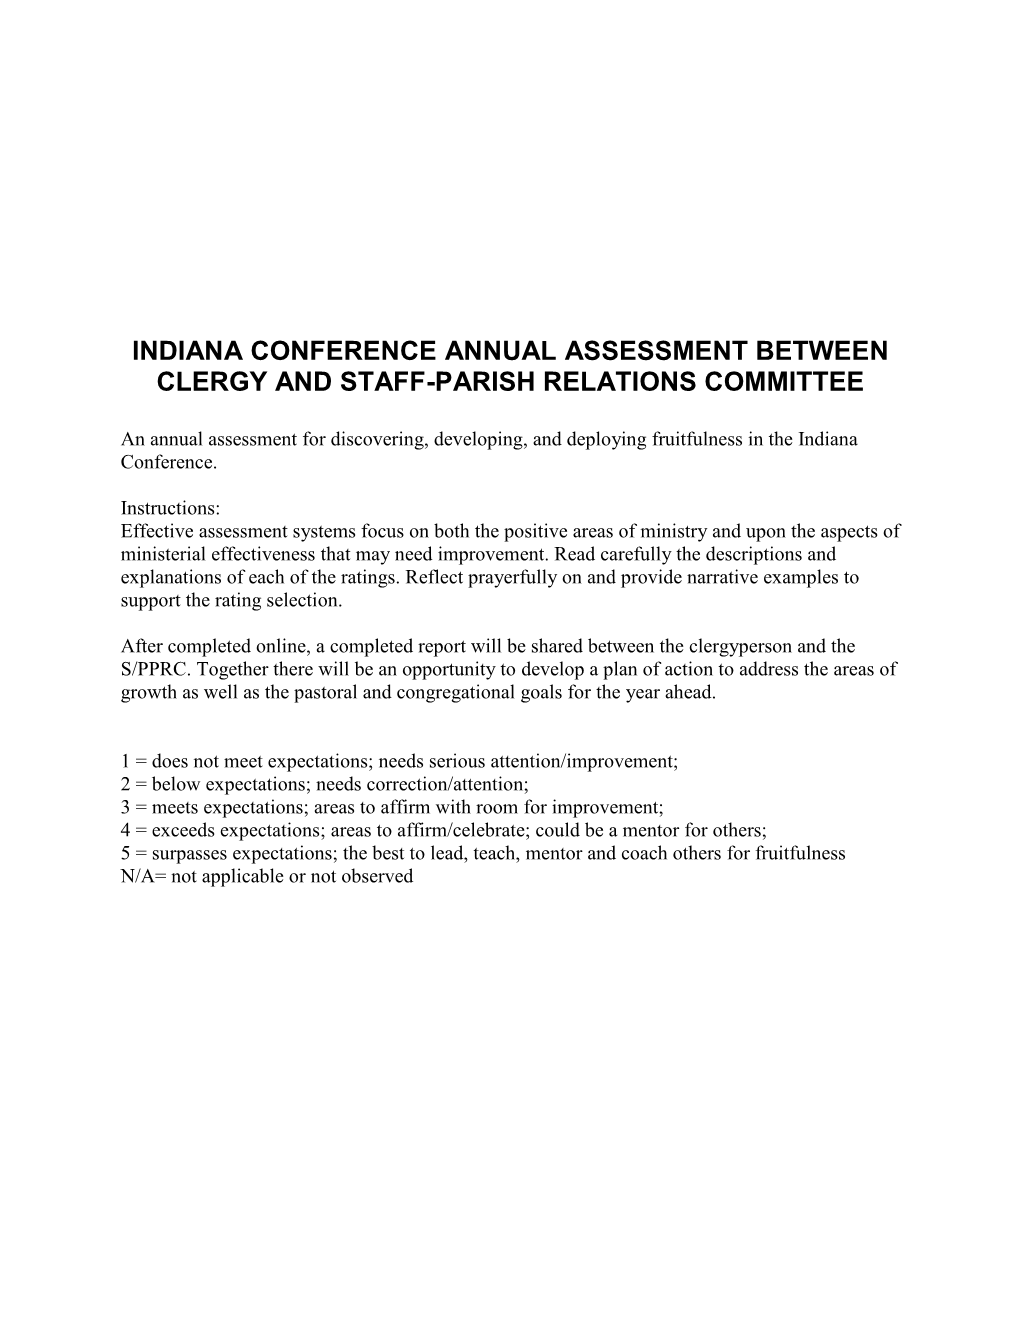 Indiana Conference Annual Assessment Between Clergy and Staff-Parish Relations Committee